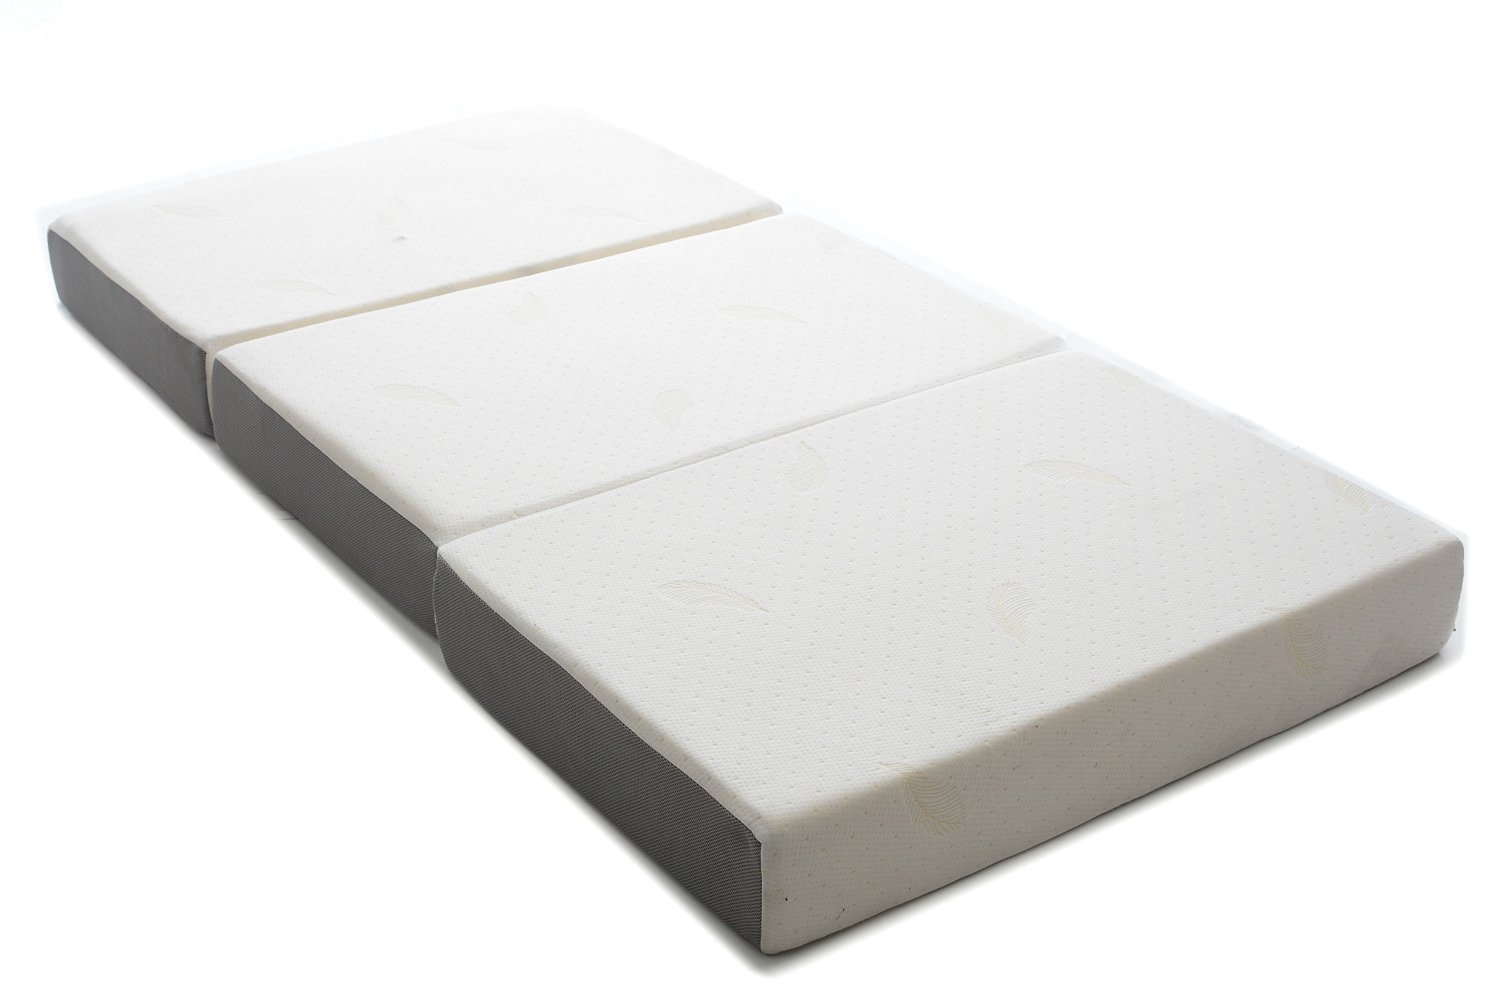 Milliard 6-Inch Memory Foam Tri-fold Mattress with Ultra Soft Removable Cover with Non-Slip Bottom - Twin